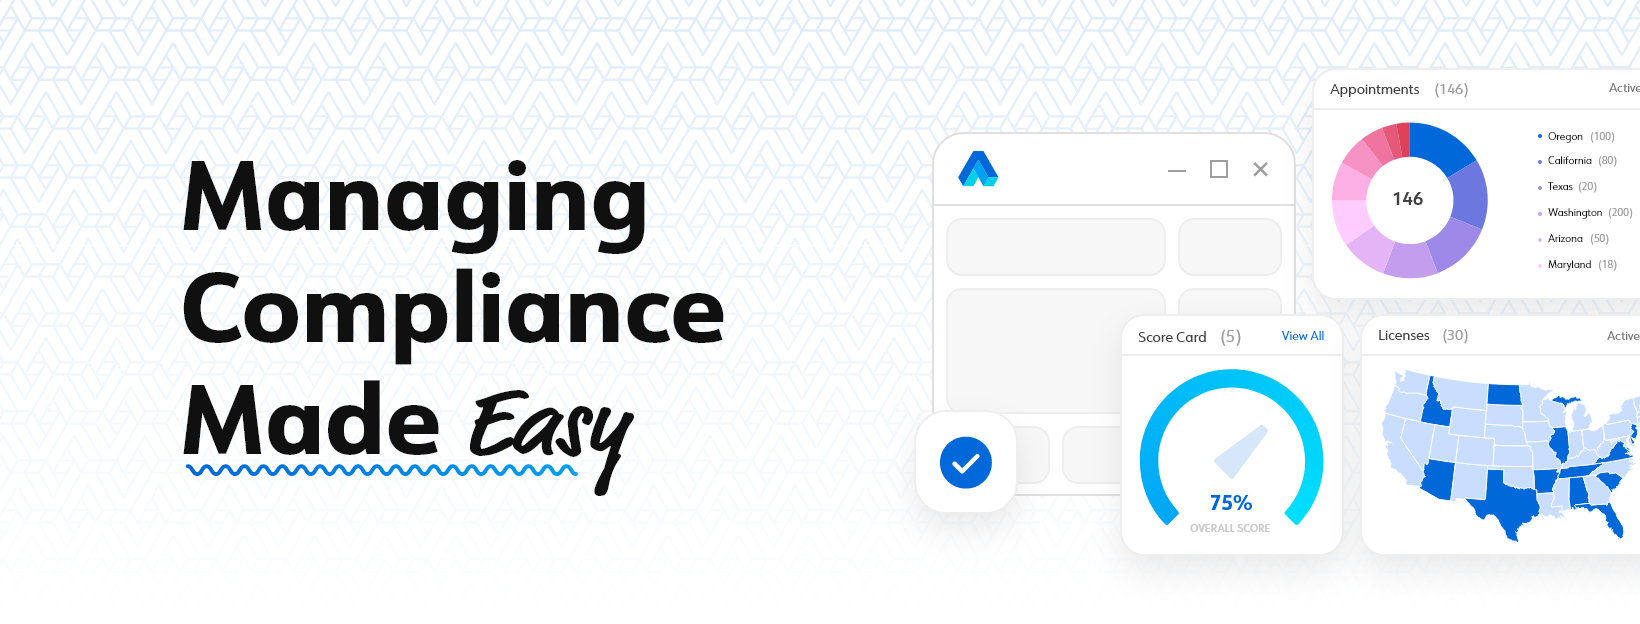 Managing Insurance Compliance and Licenses Made Easy | Agenzee